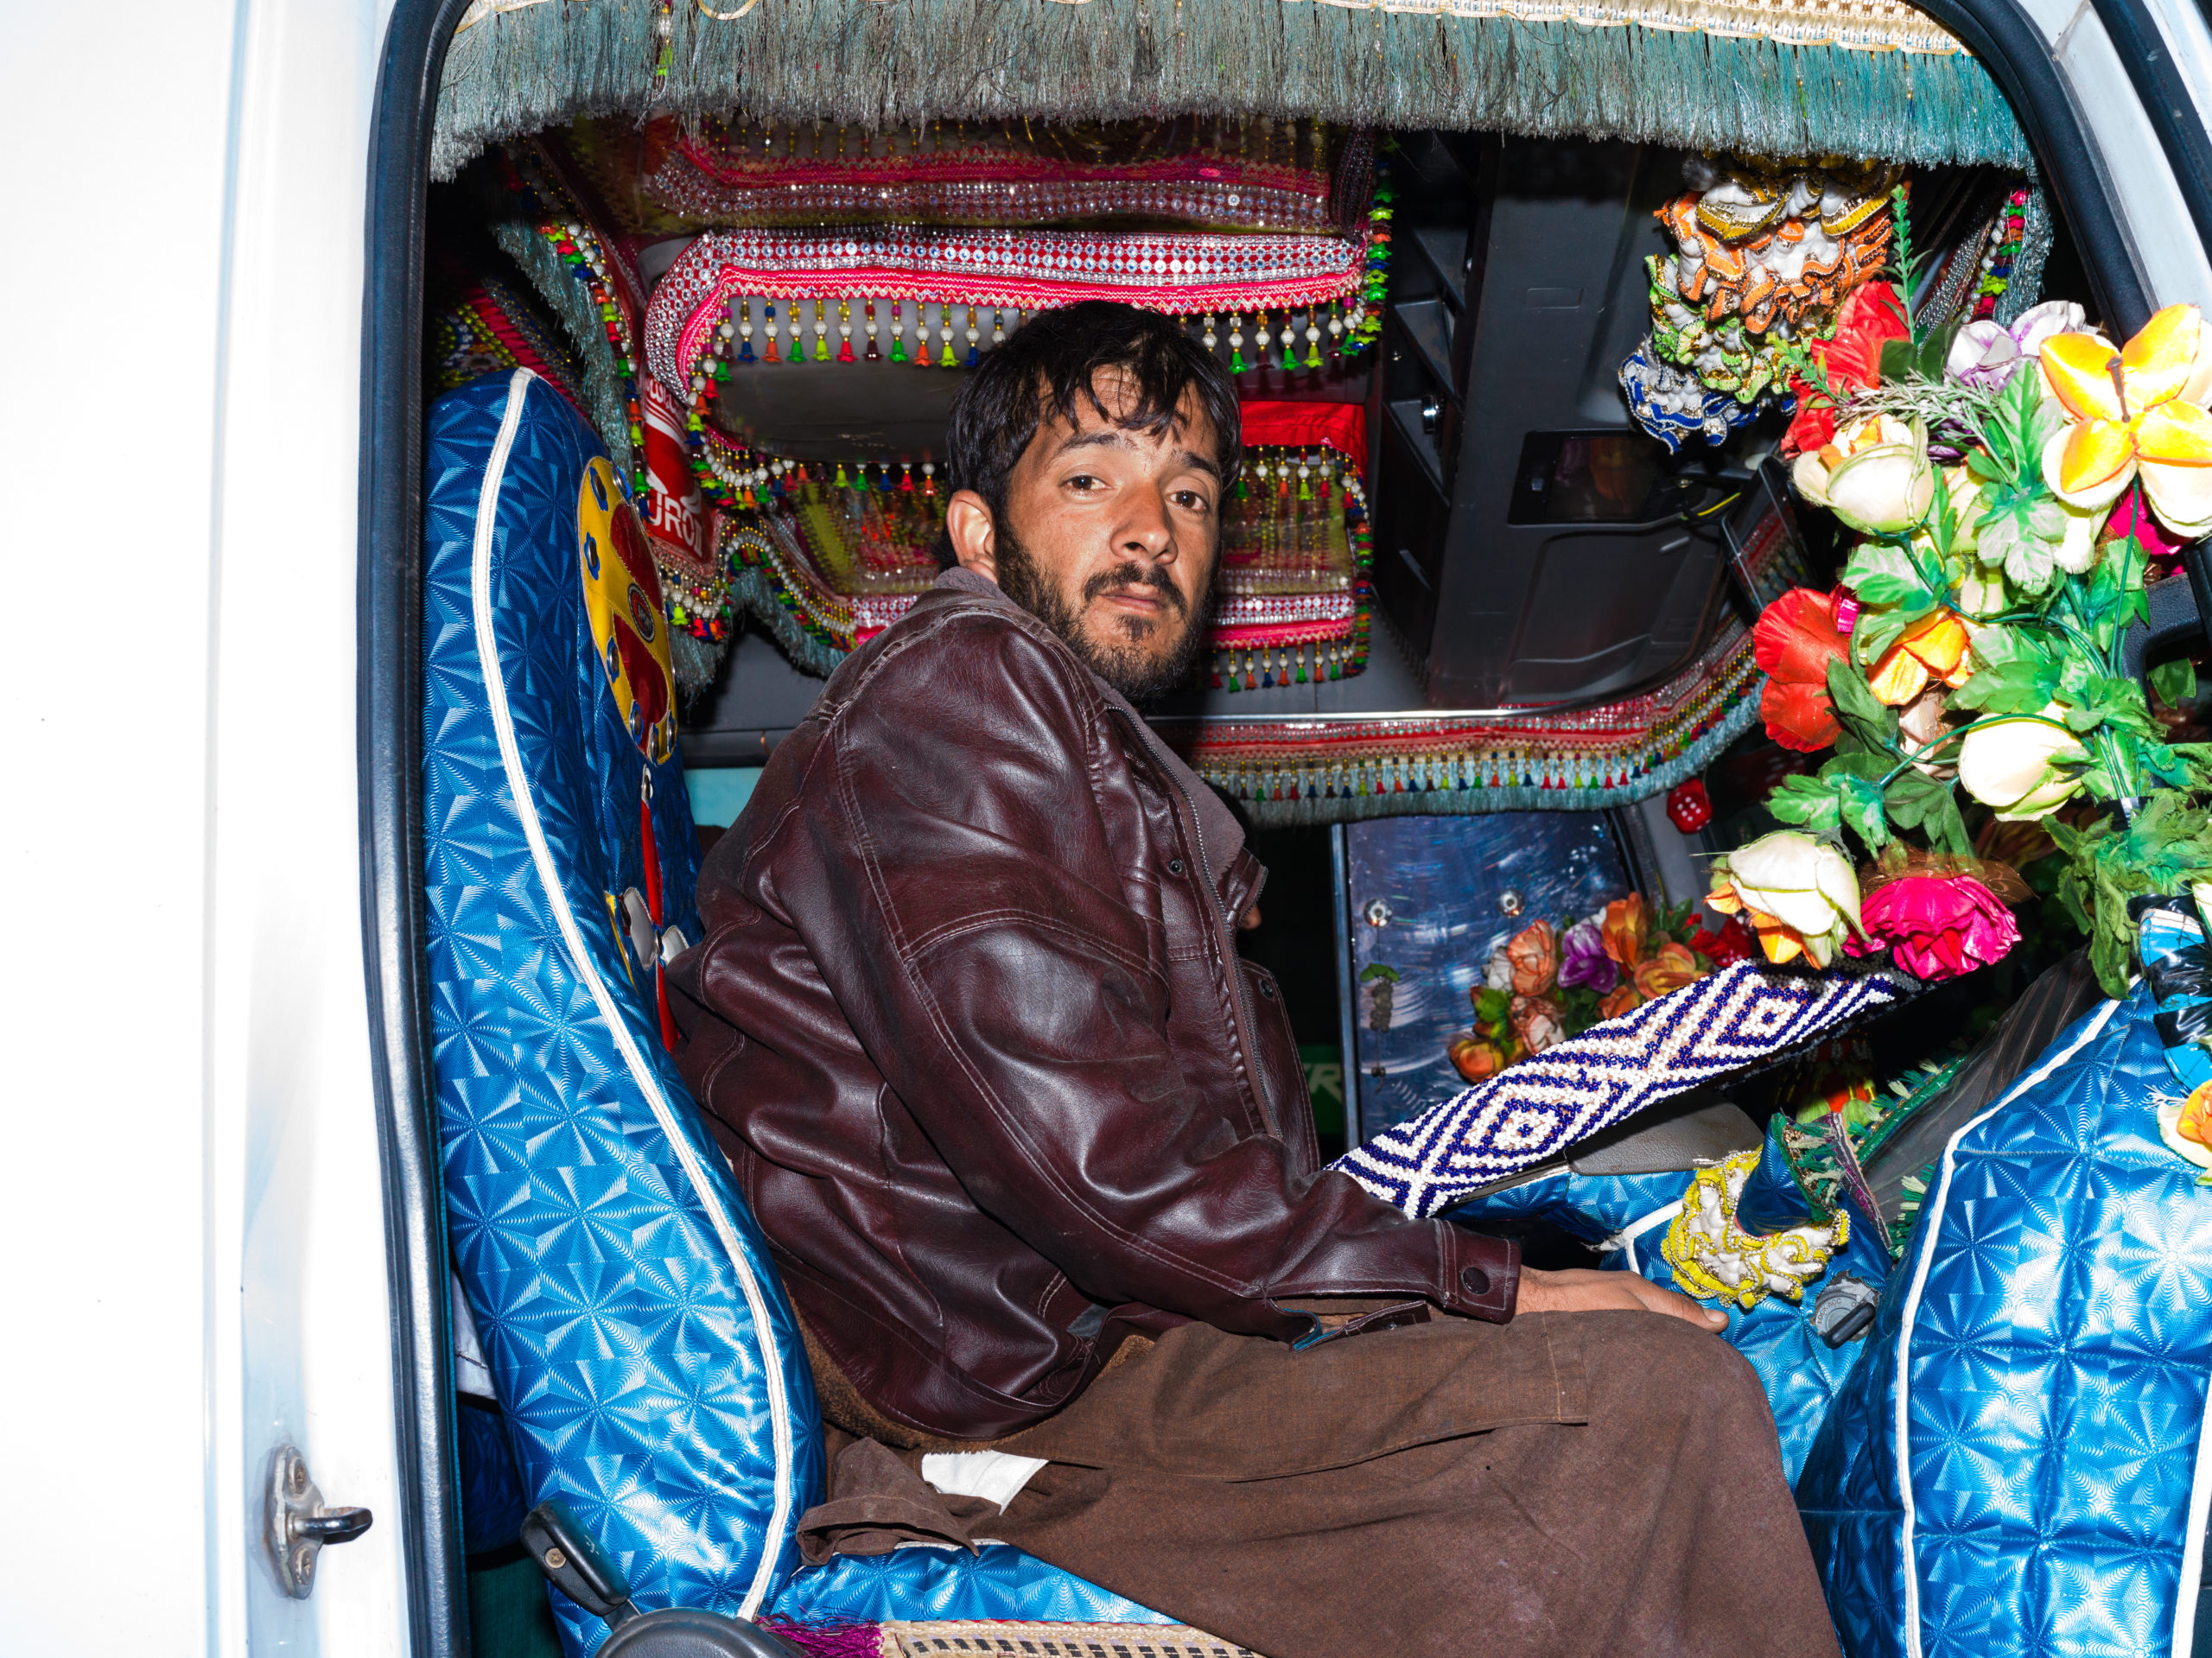 A truck driver poses for a photo inside his decorated truck